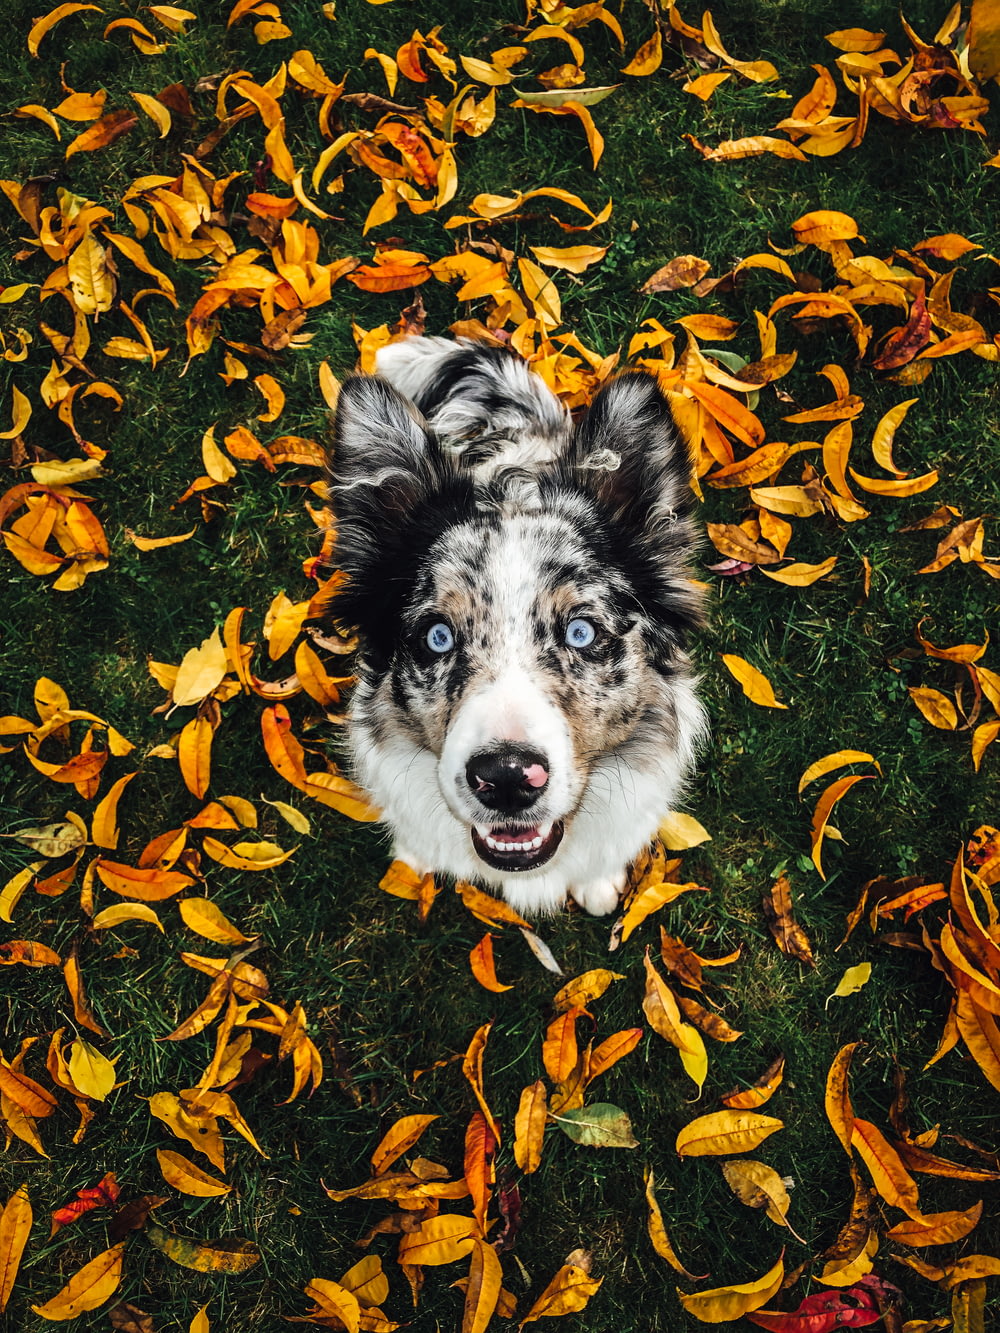 white and black short coated dog on brown dried leaves